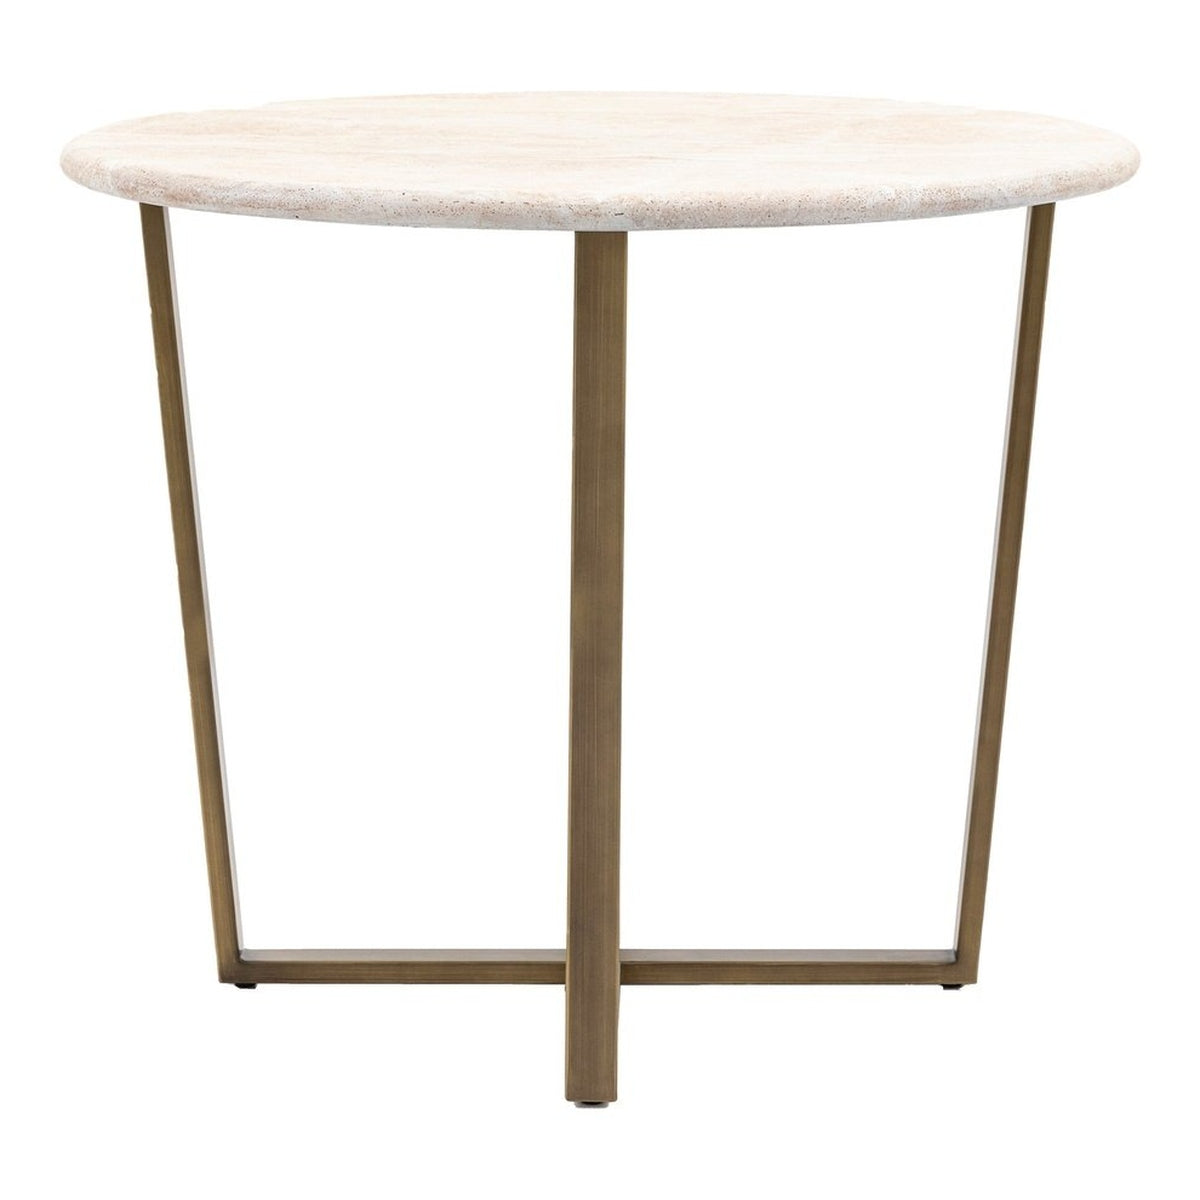 Gallery Interiors Dover Round Dining Table